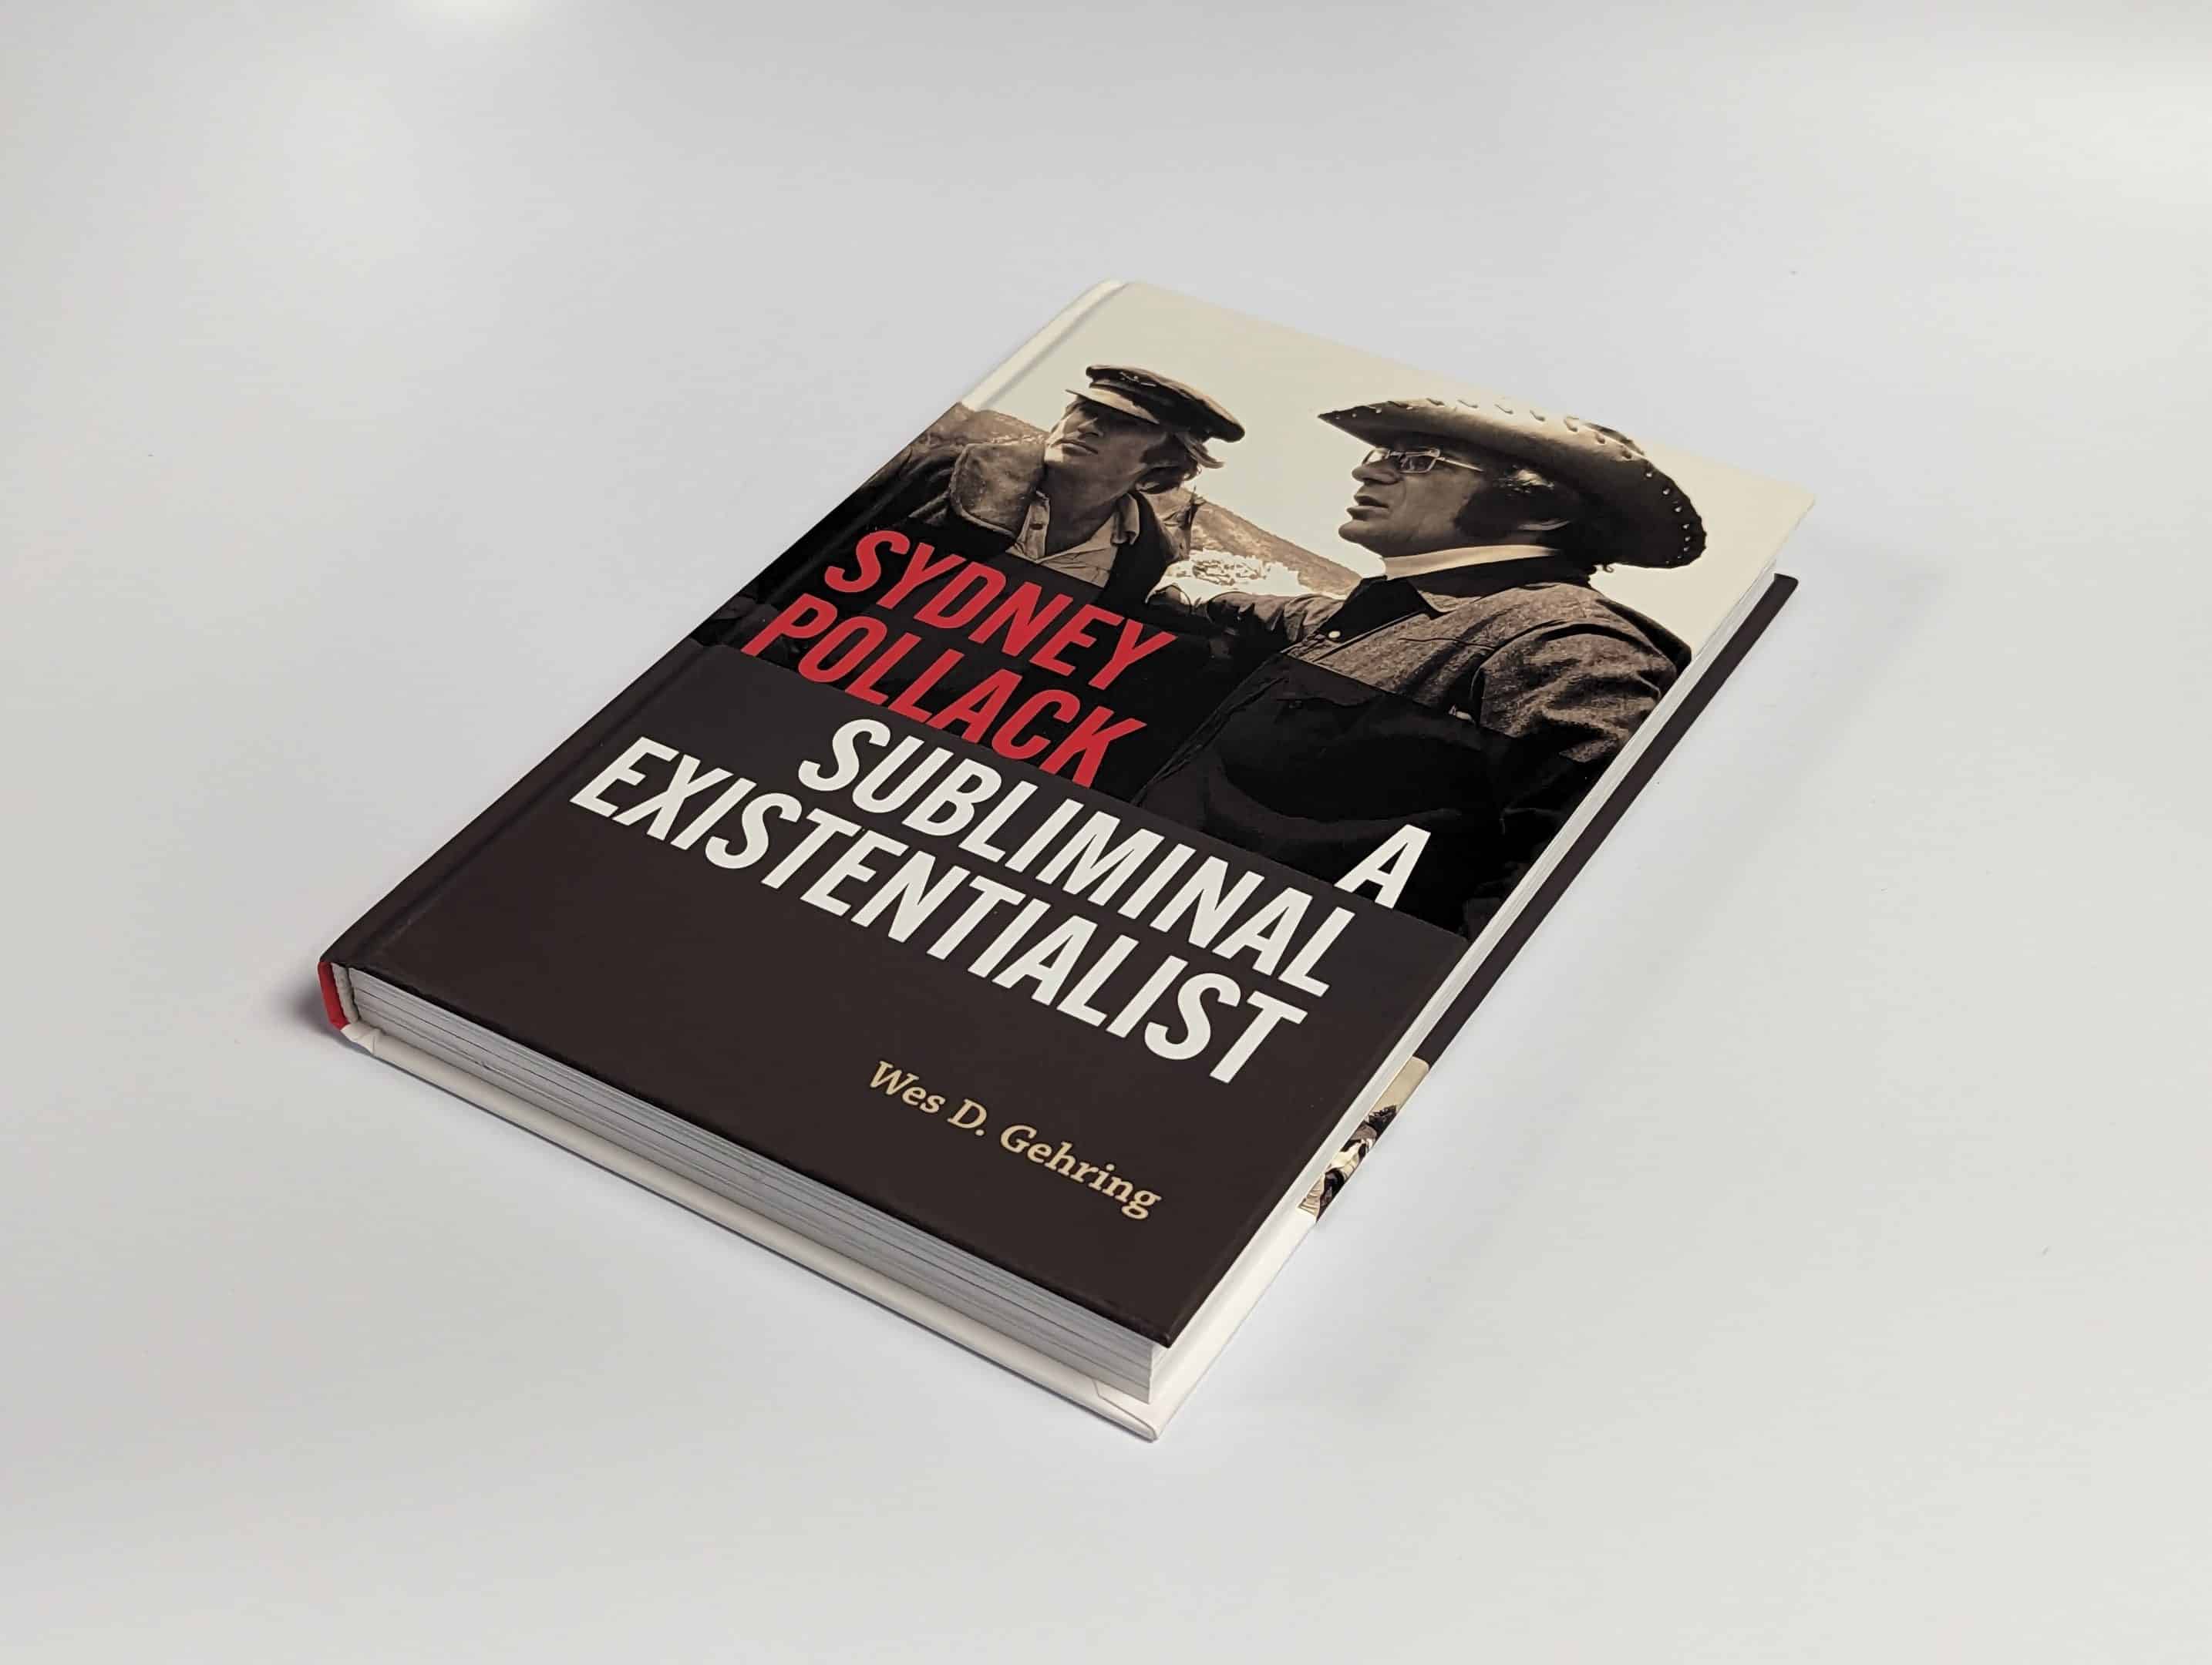 Sydney Pollack: A Subliminal Existentialist available now from Indiana Historical Society Press 19